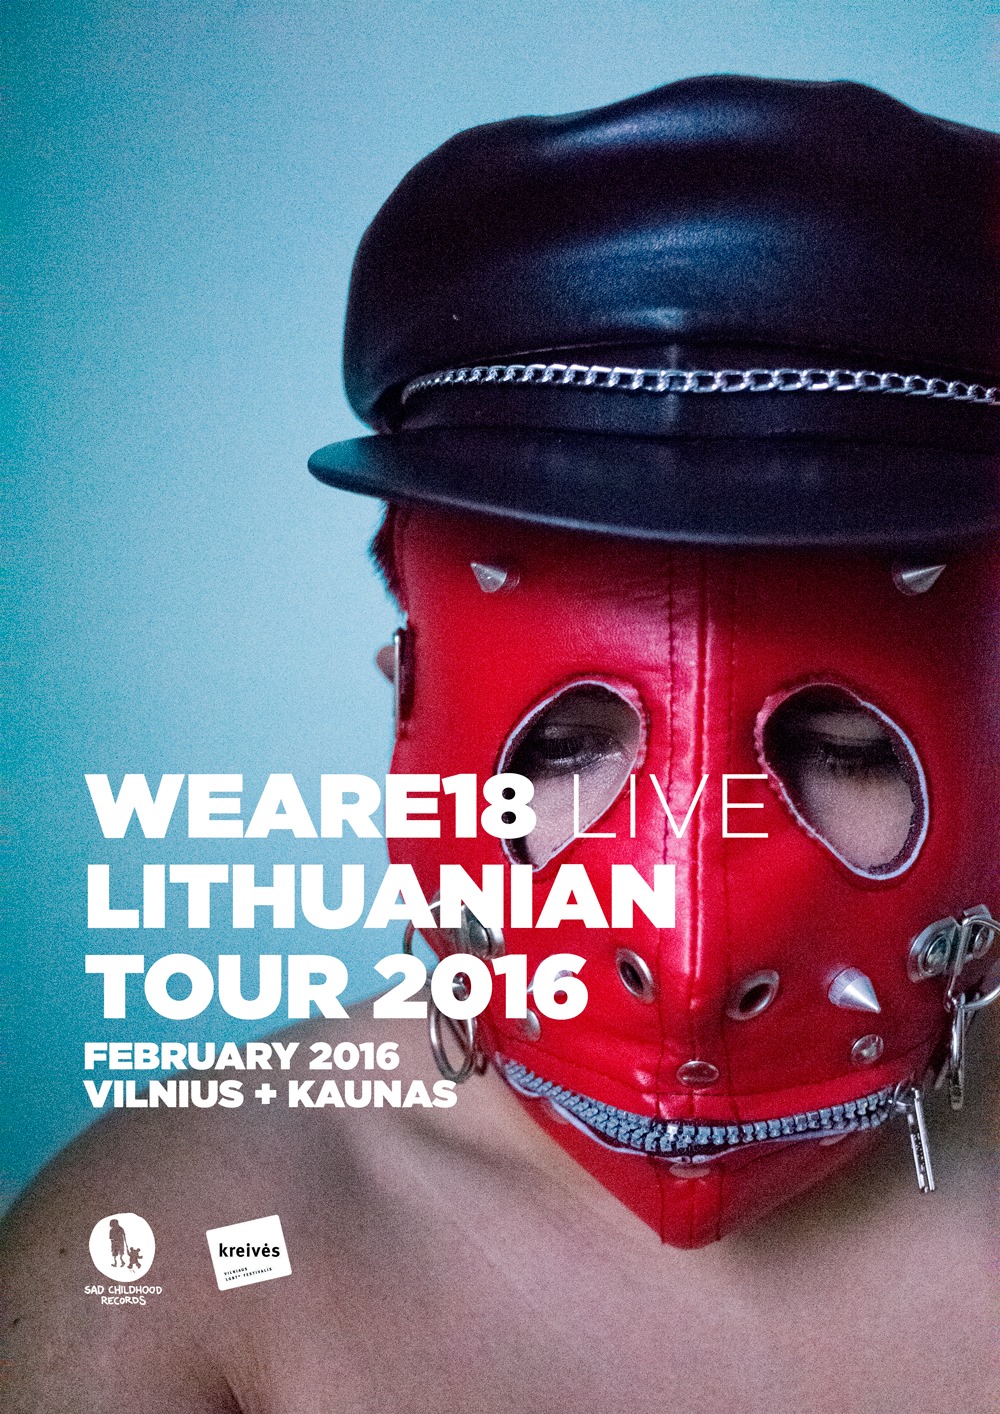 Weare18 Lithuania tour 2016 poster